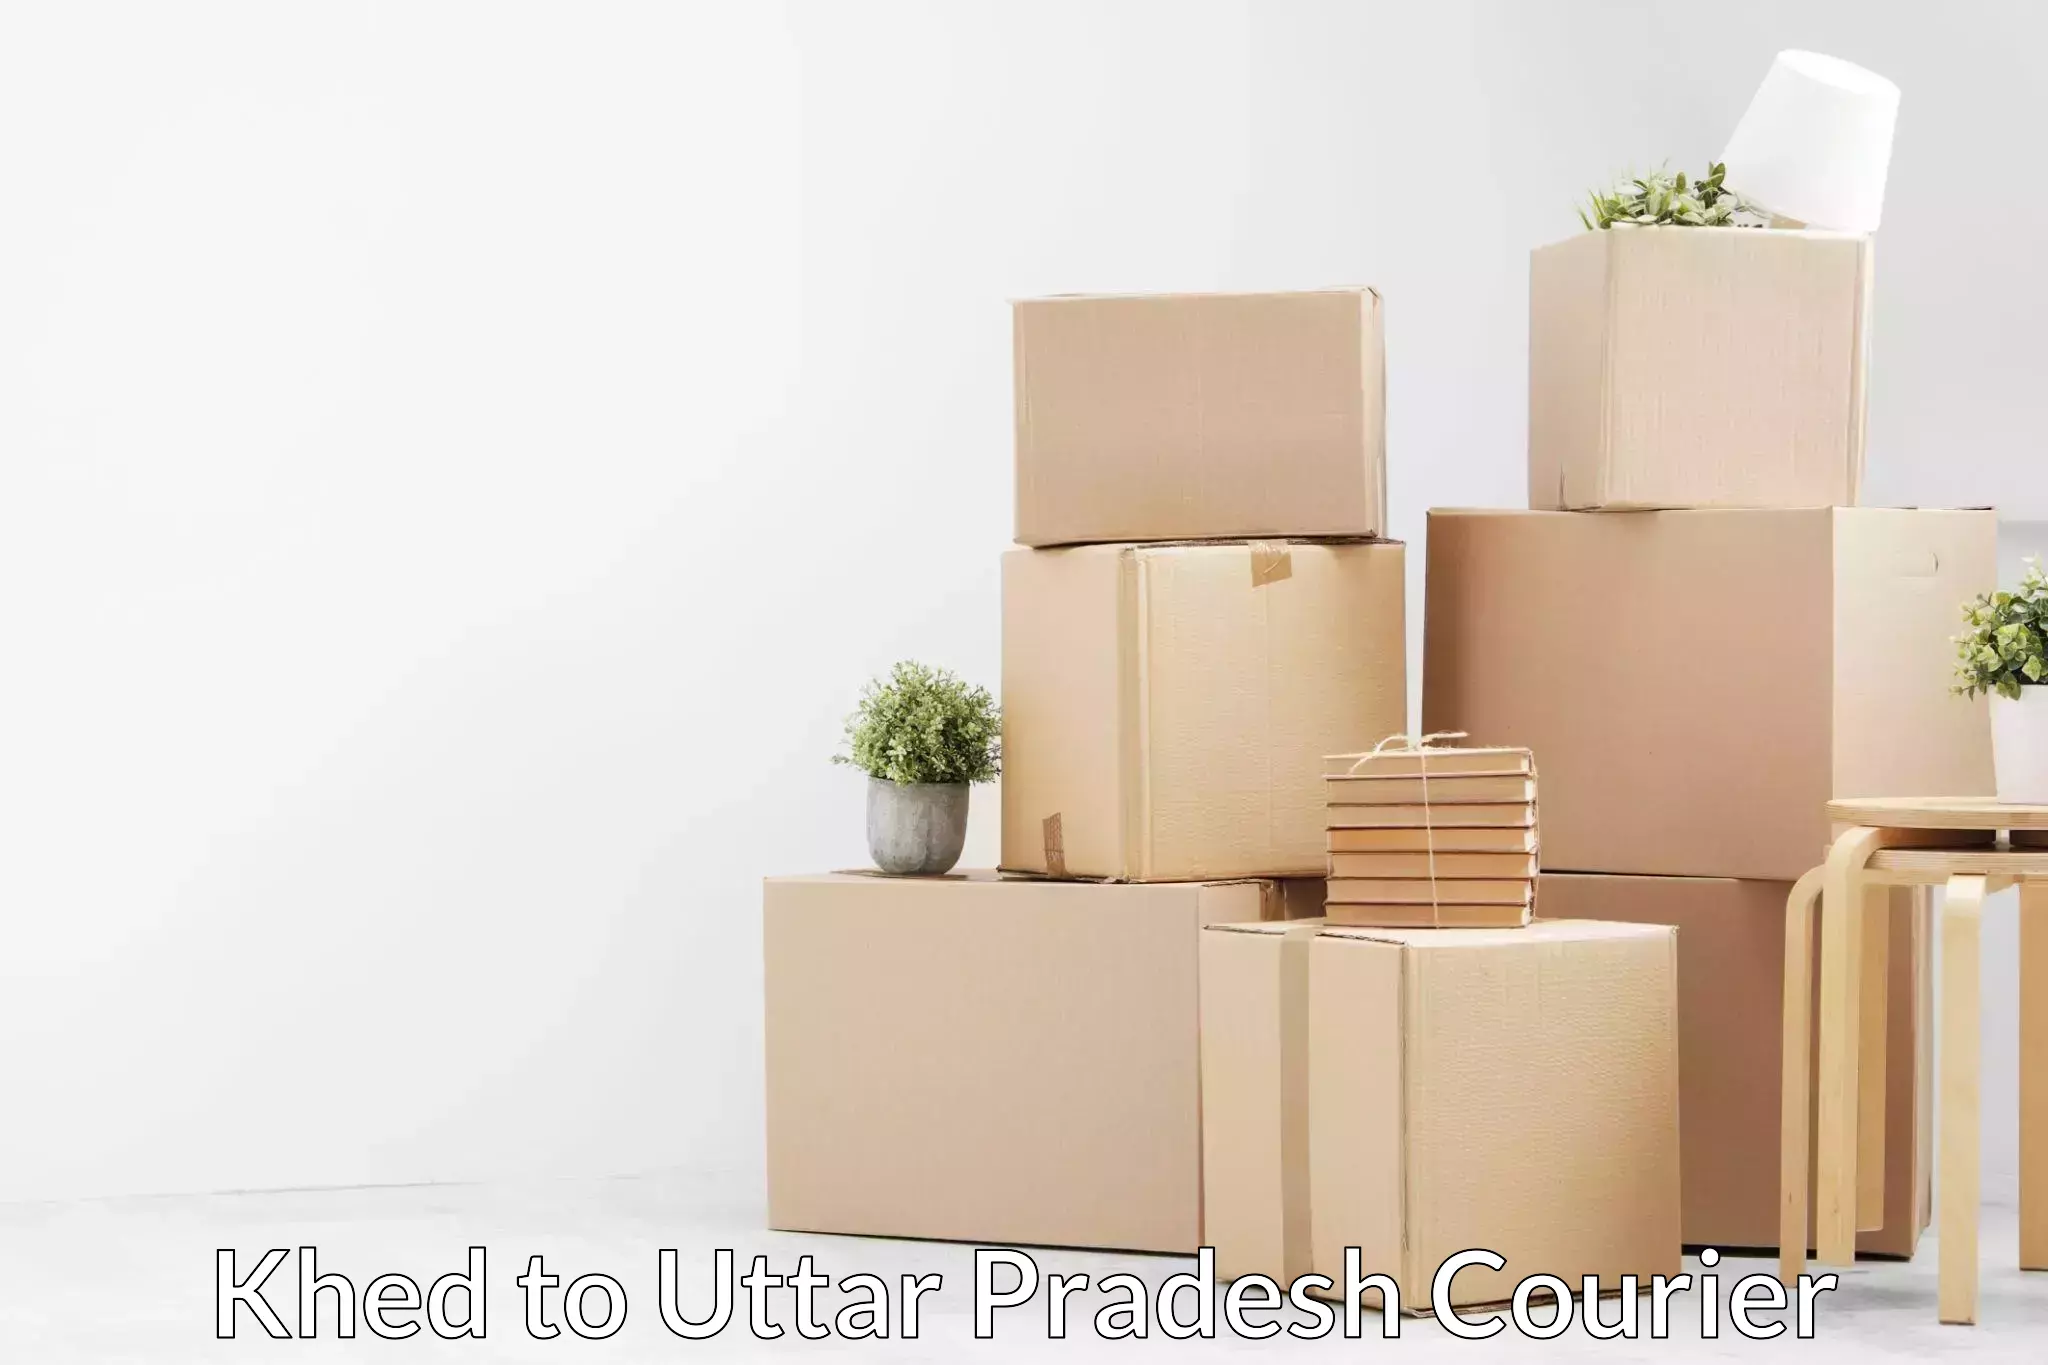 Professional home movers in Khed to Firozabad